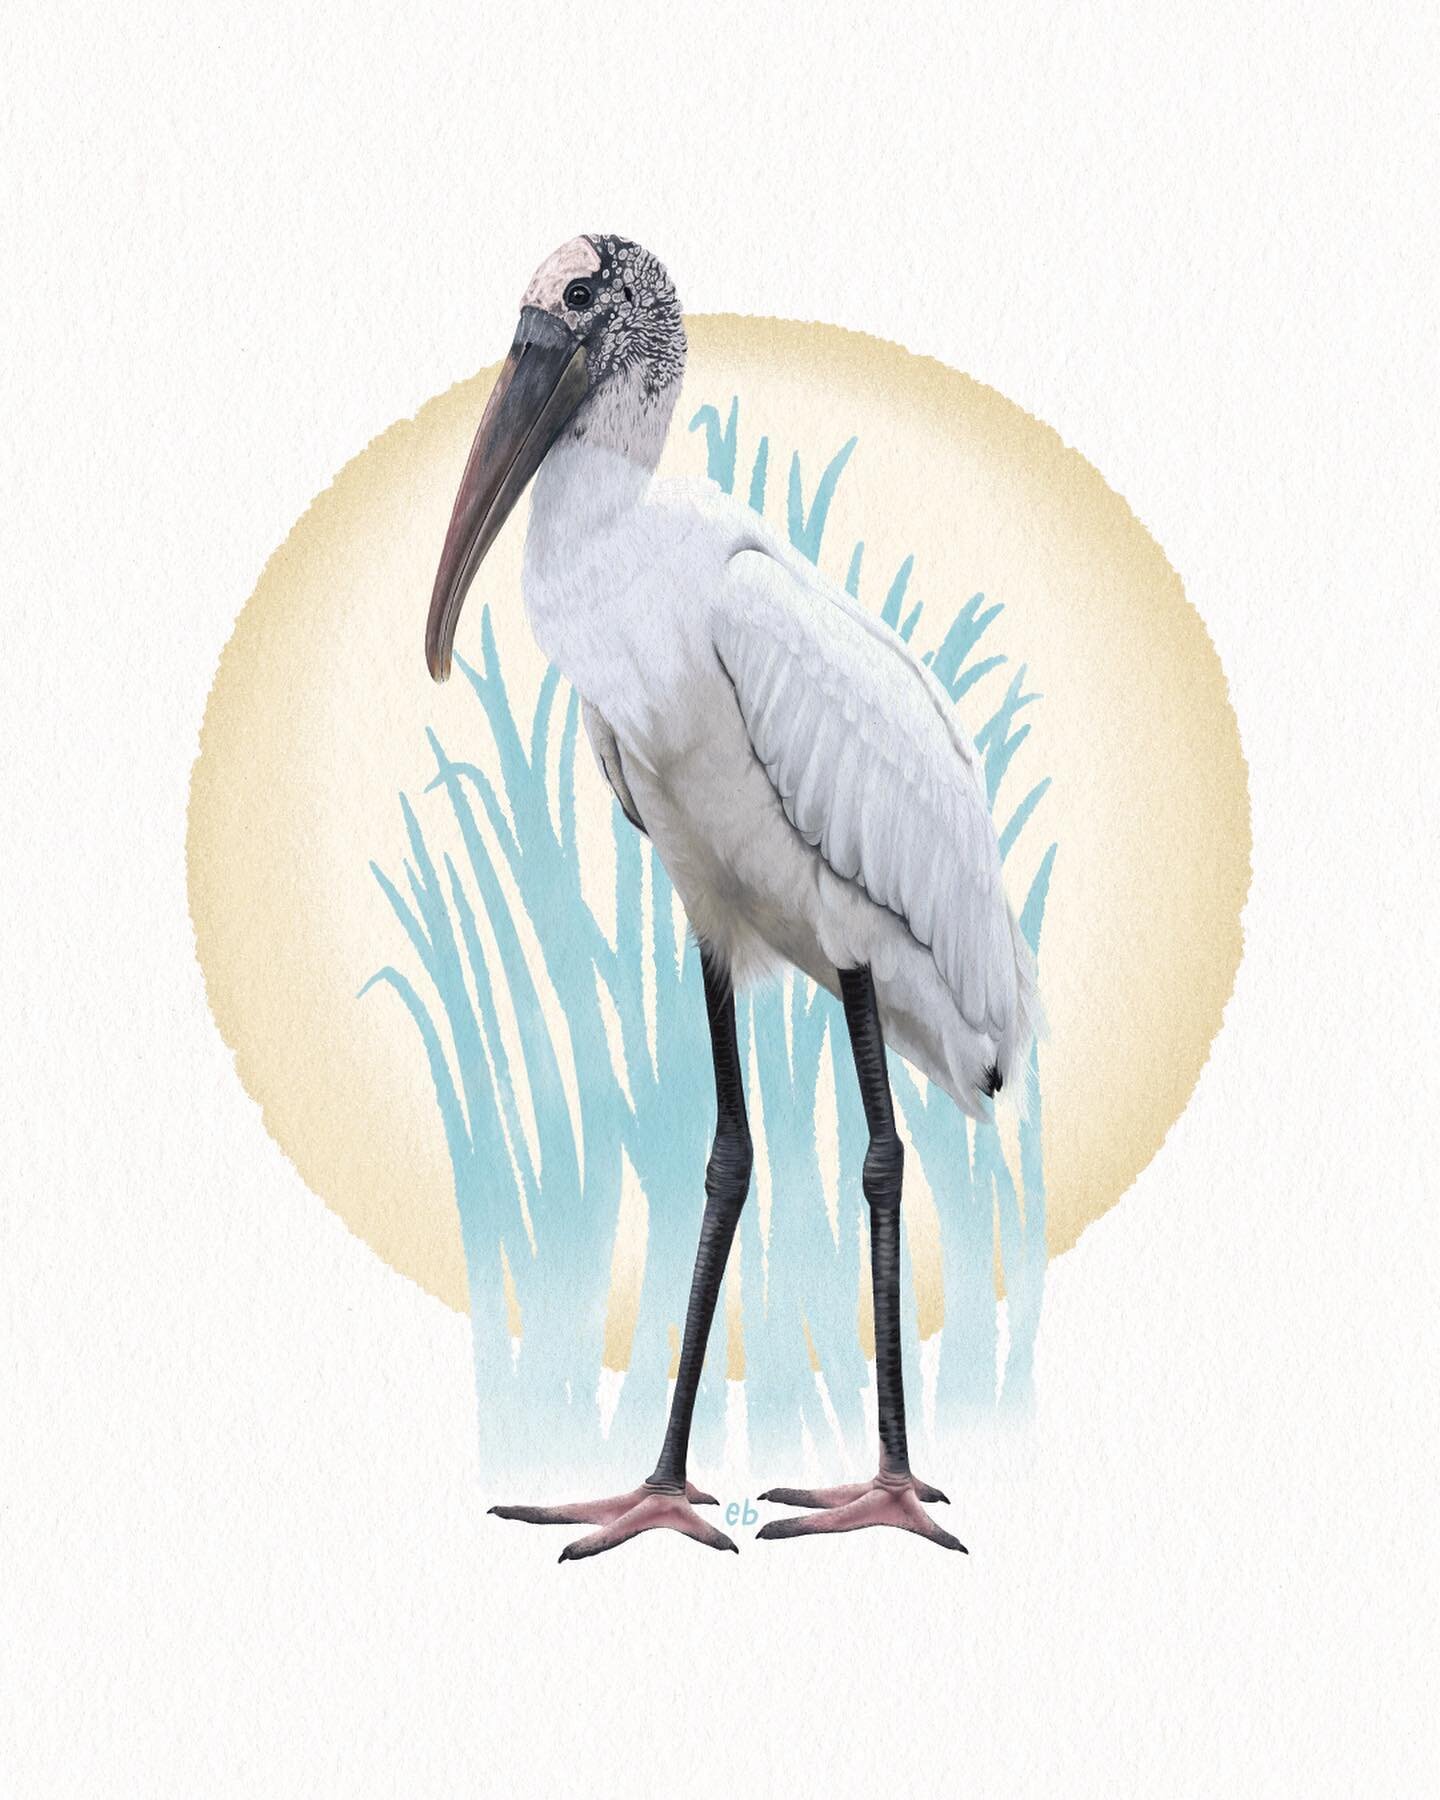 When you&rsquo;re in a funk, I&rsquo;ve found it&rsquo;s best to try something new. Been playing with some new Procreate techniques and am excited to explore more!
________________________________

Wood Stork juvenile (Mycteria americana)
&bull;
&bul